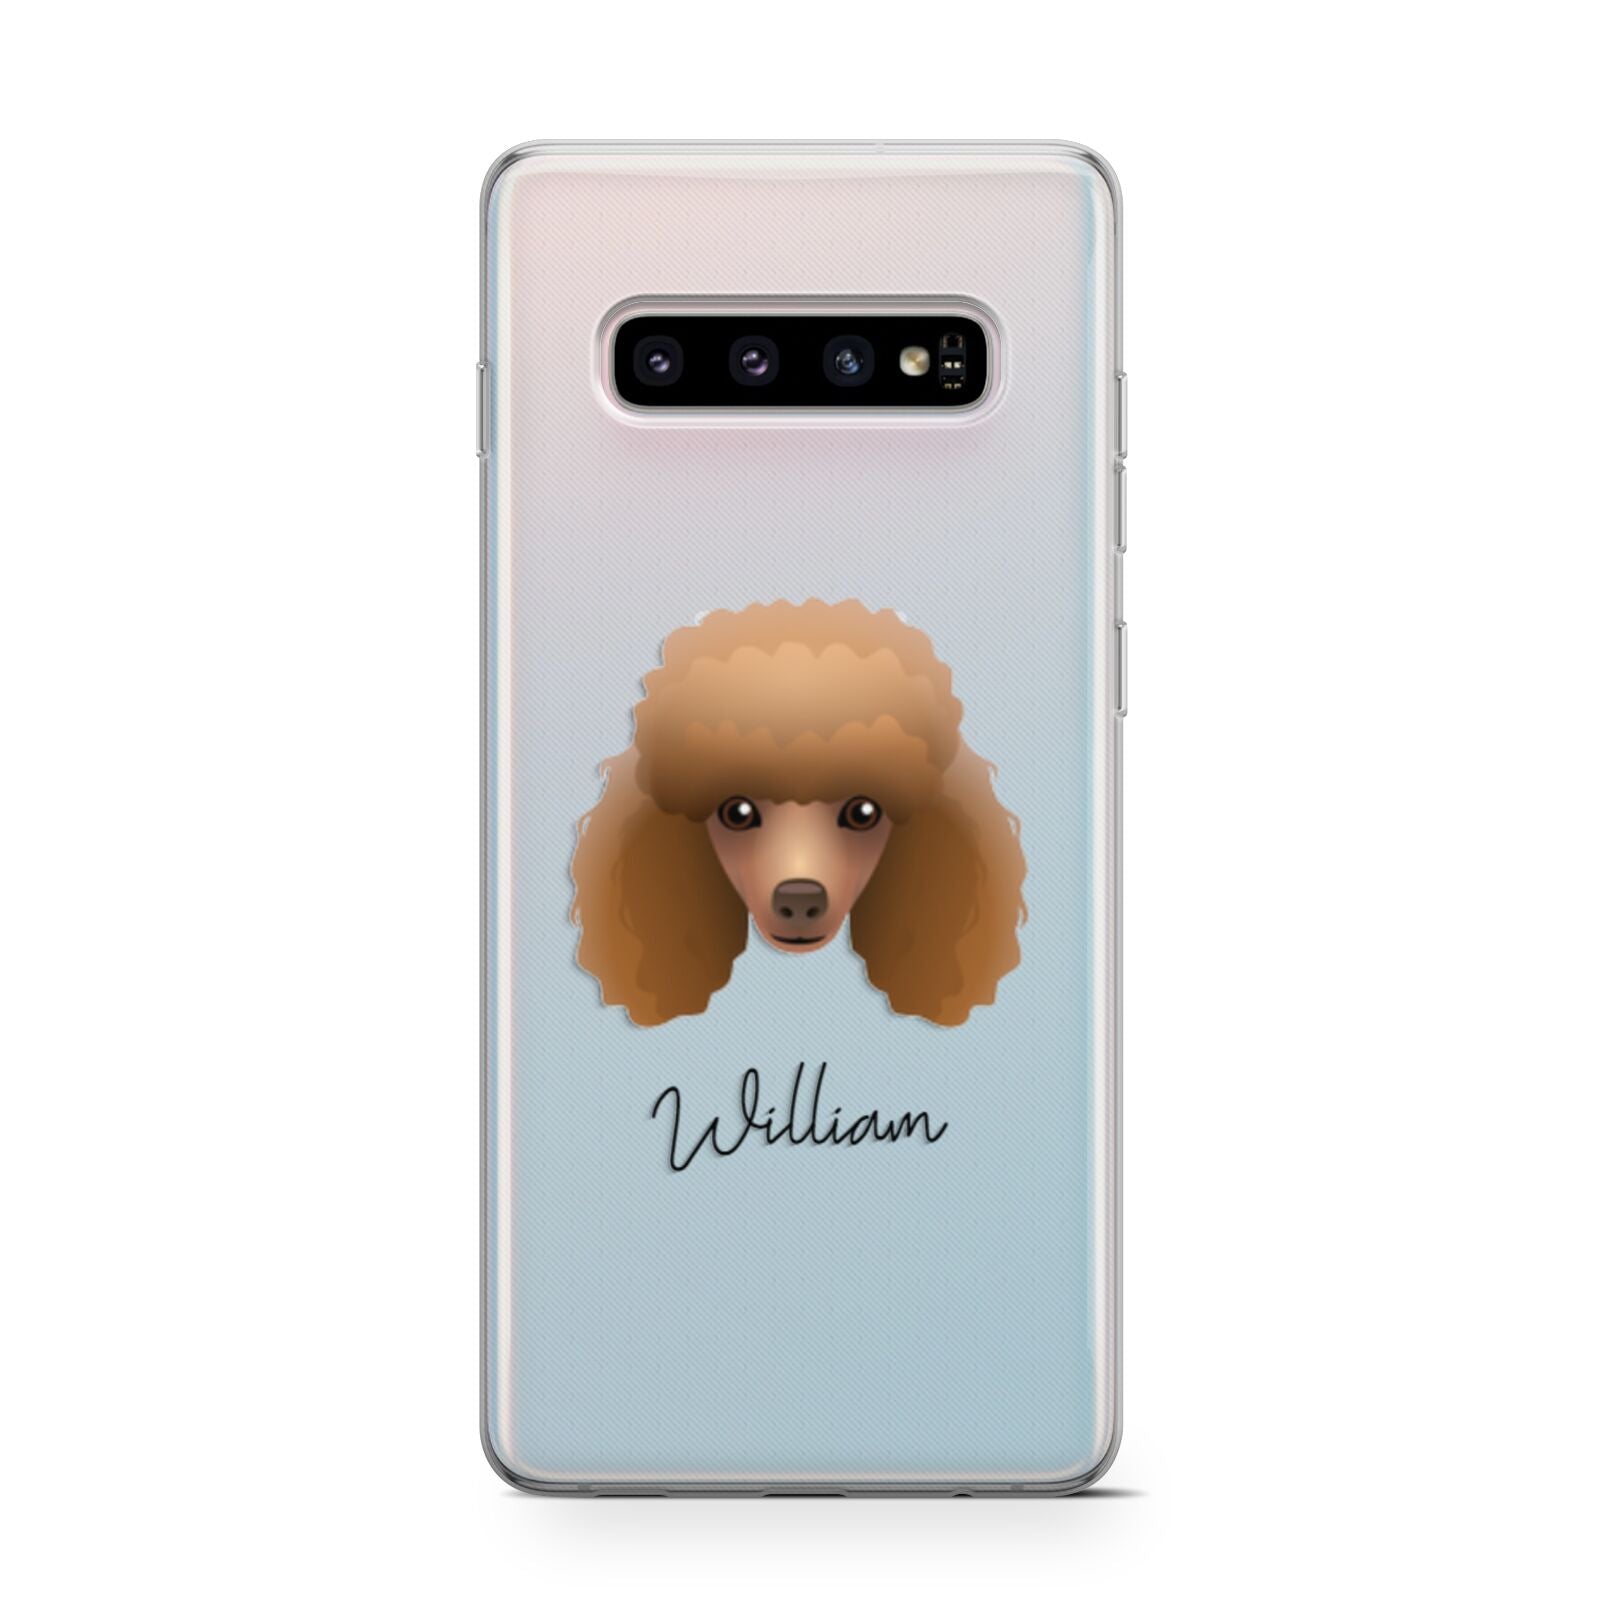 Toy Poodle Personalised Samsung Galaxy S10 Case